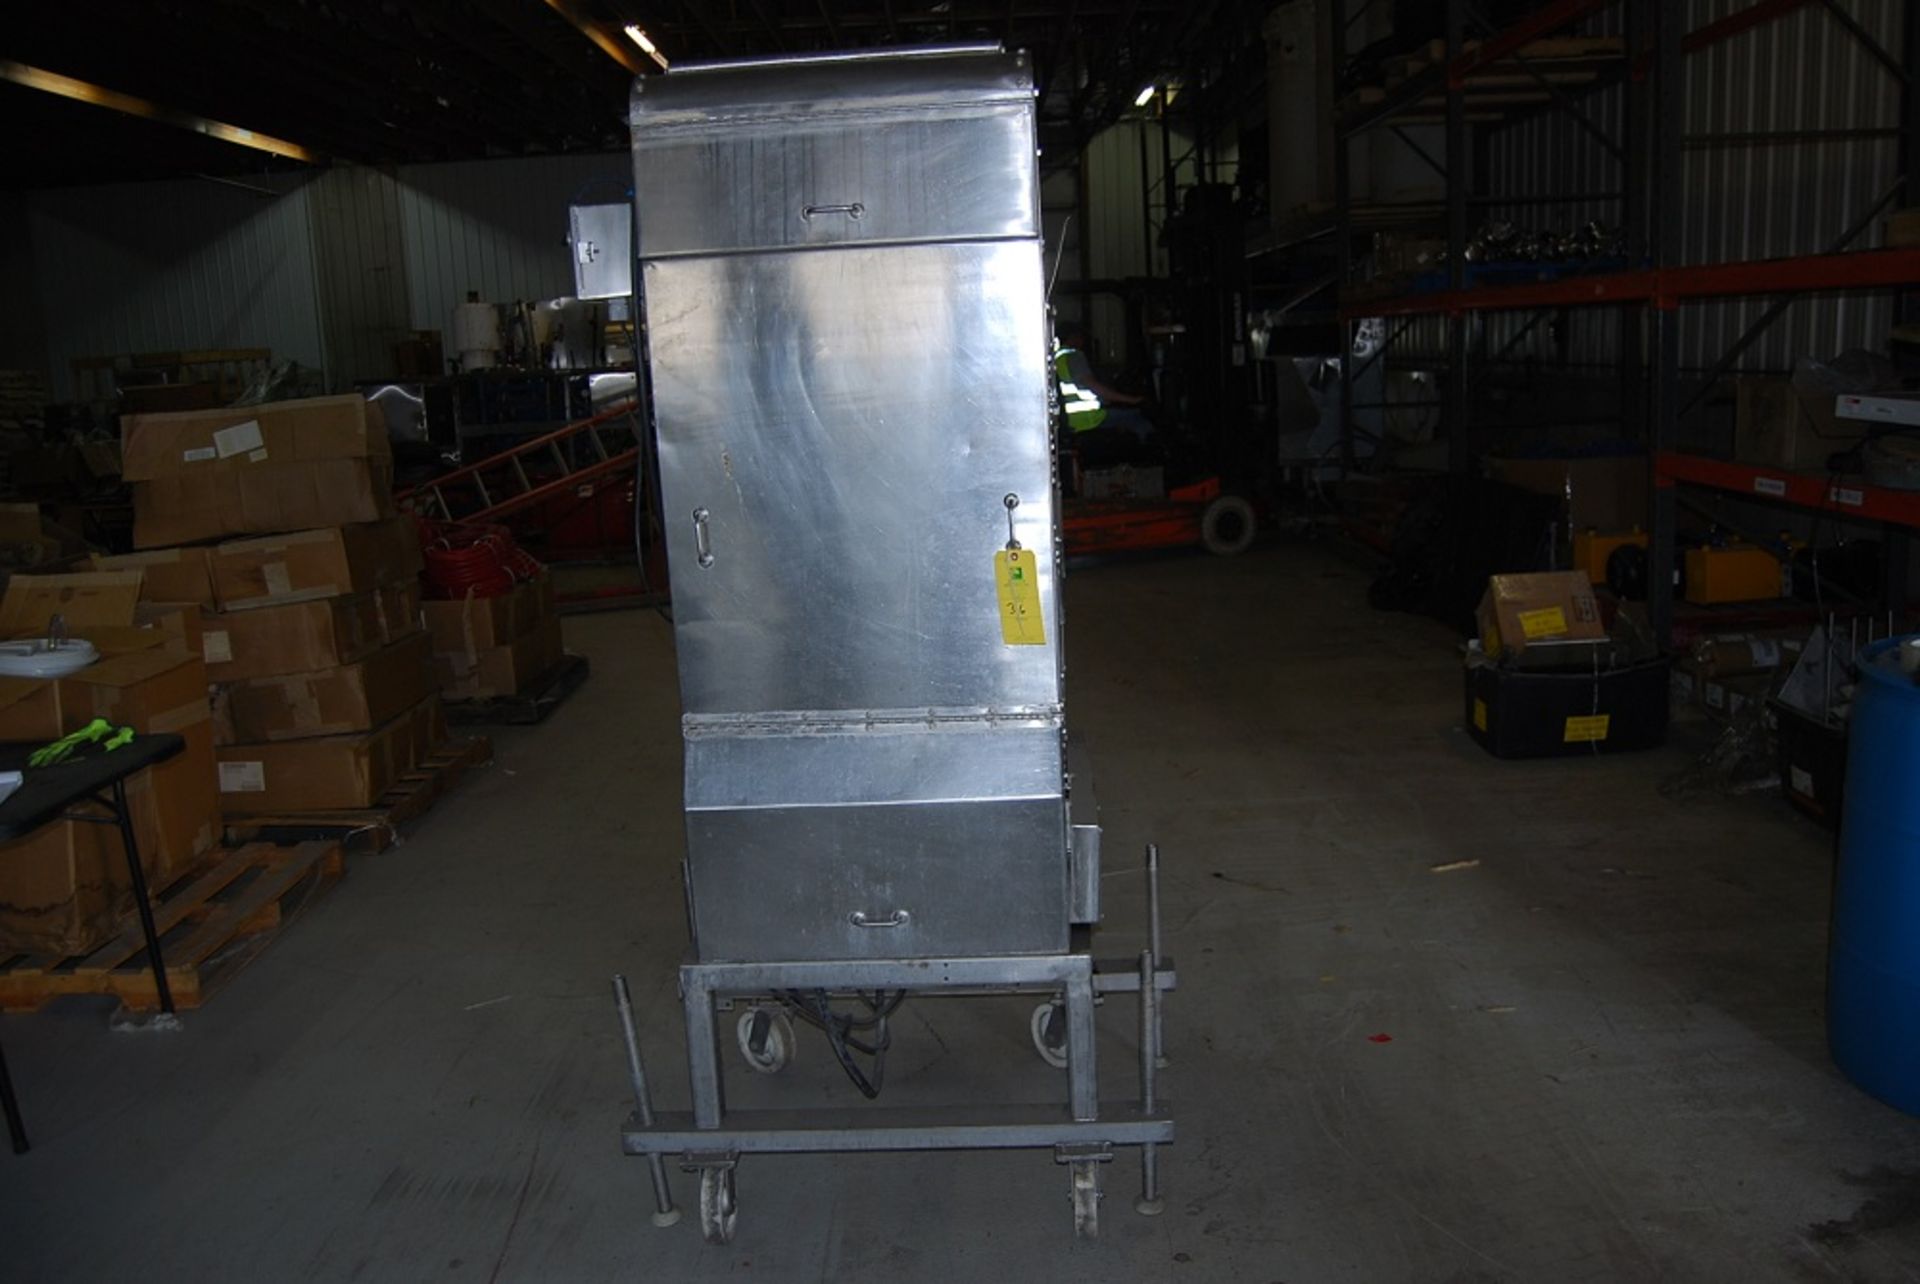 Lid Unscrambler, Manufacture Unknow, No Model or SN Foot print: 43" wide x 41" deep x 83" tall, 22